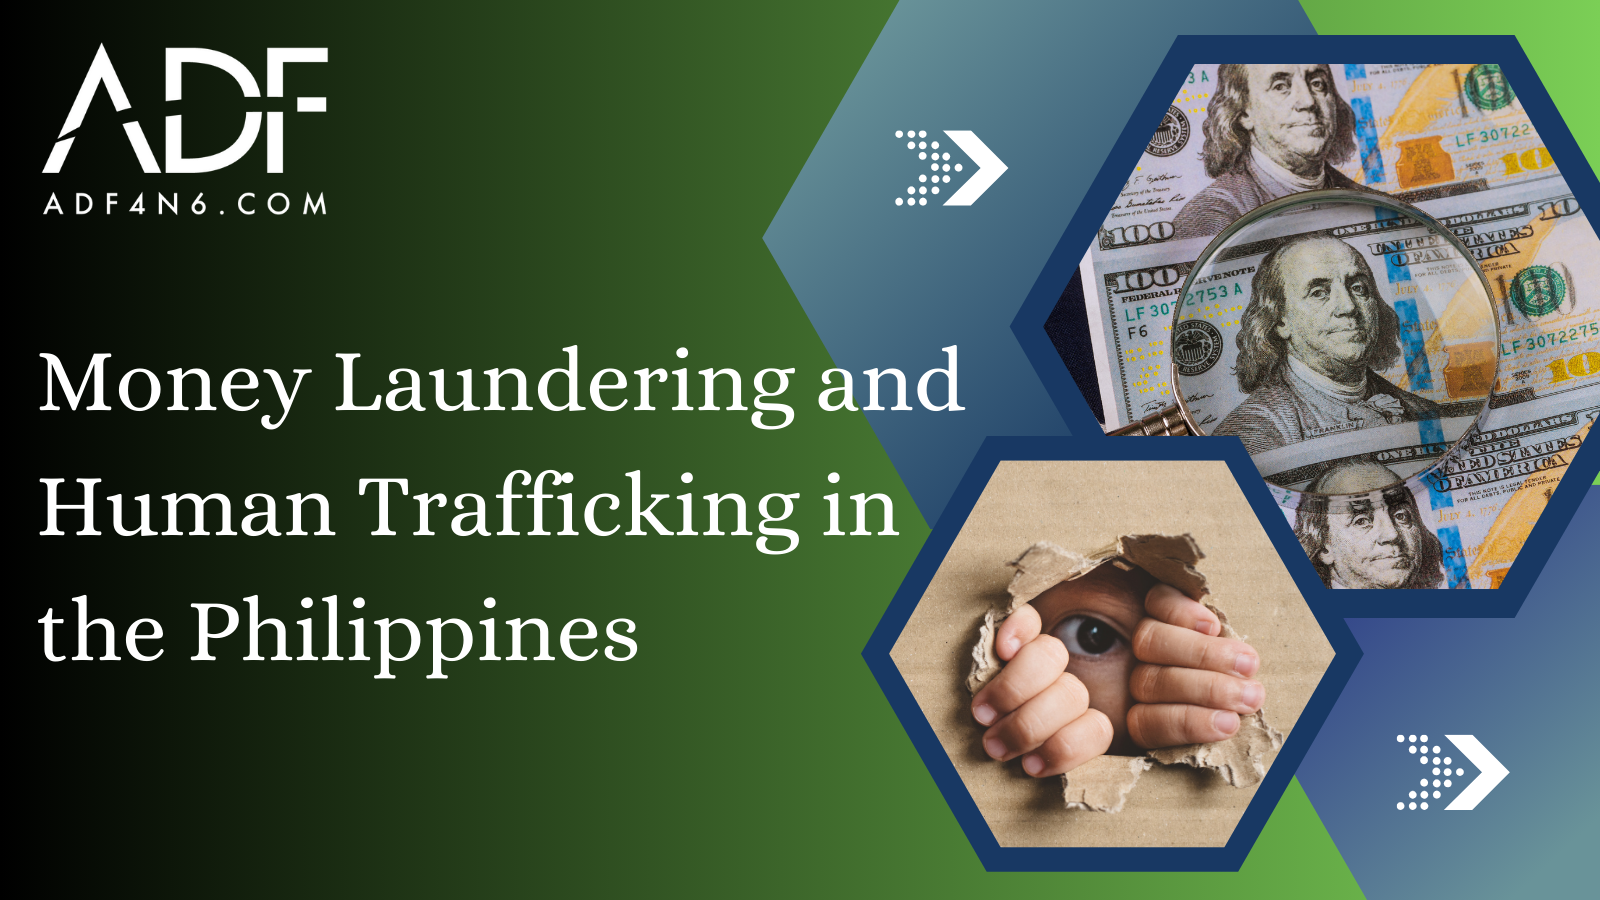 Money Laundering and Human Trafficking in the Philippines